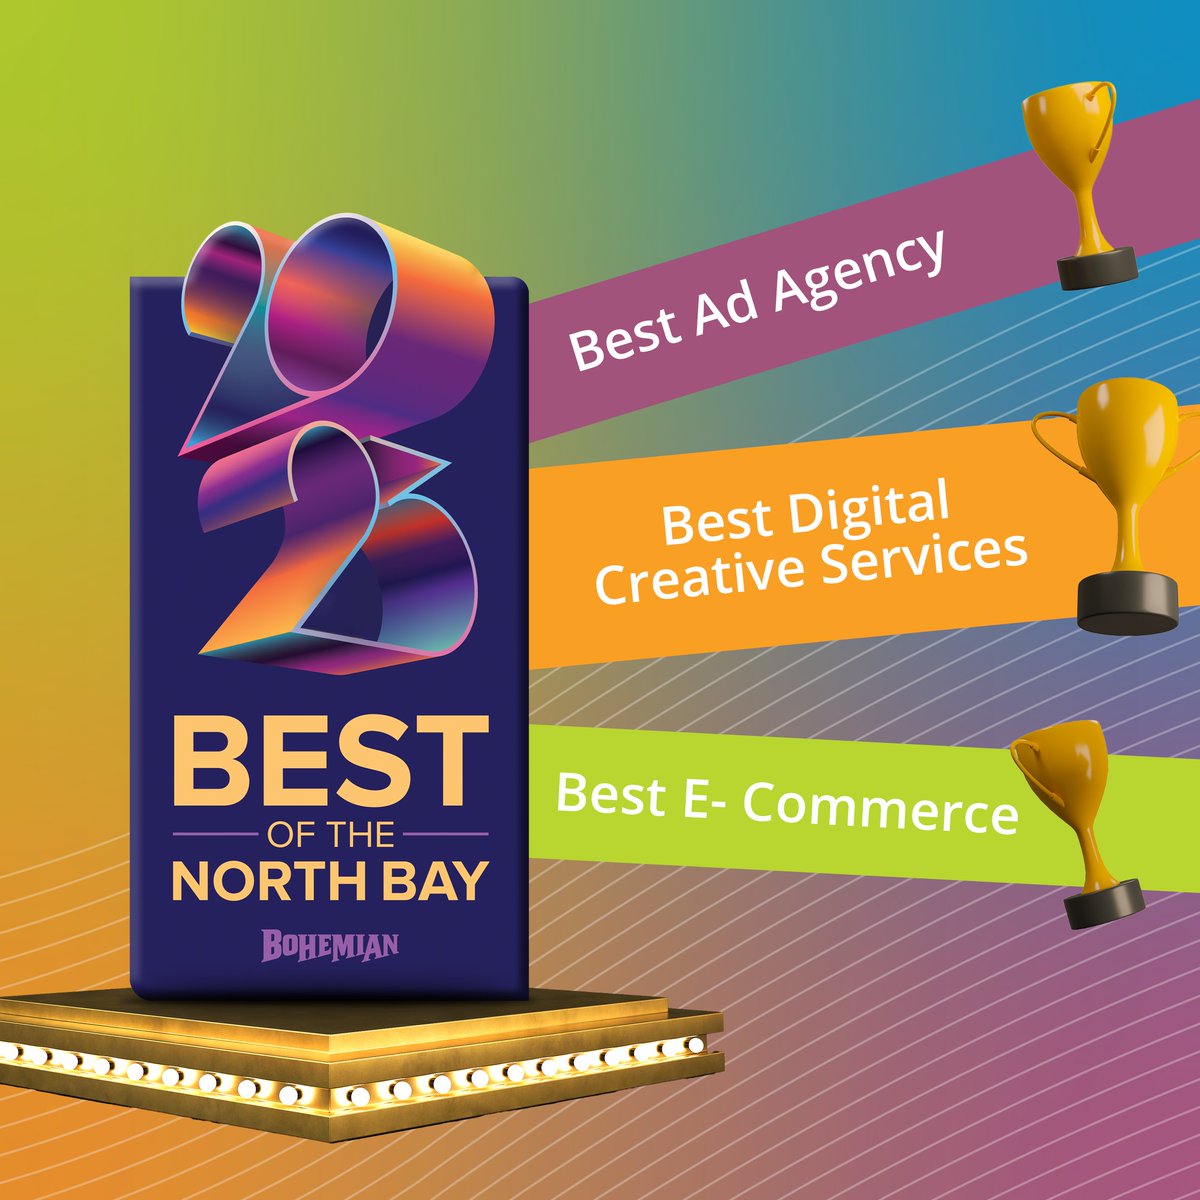 We're thrilled to announce that won THREE incredible wins in this year's North Bay Bohemian Best of Awards! Best Digital Creative Service, Best eCommerce AND Best Ad Agency. We're blushing x3. Thank you all for your support and belief in our capabilities.